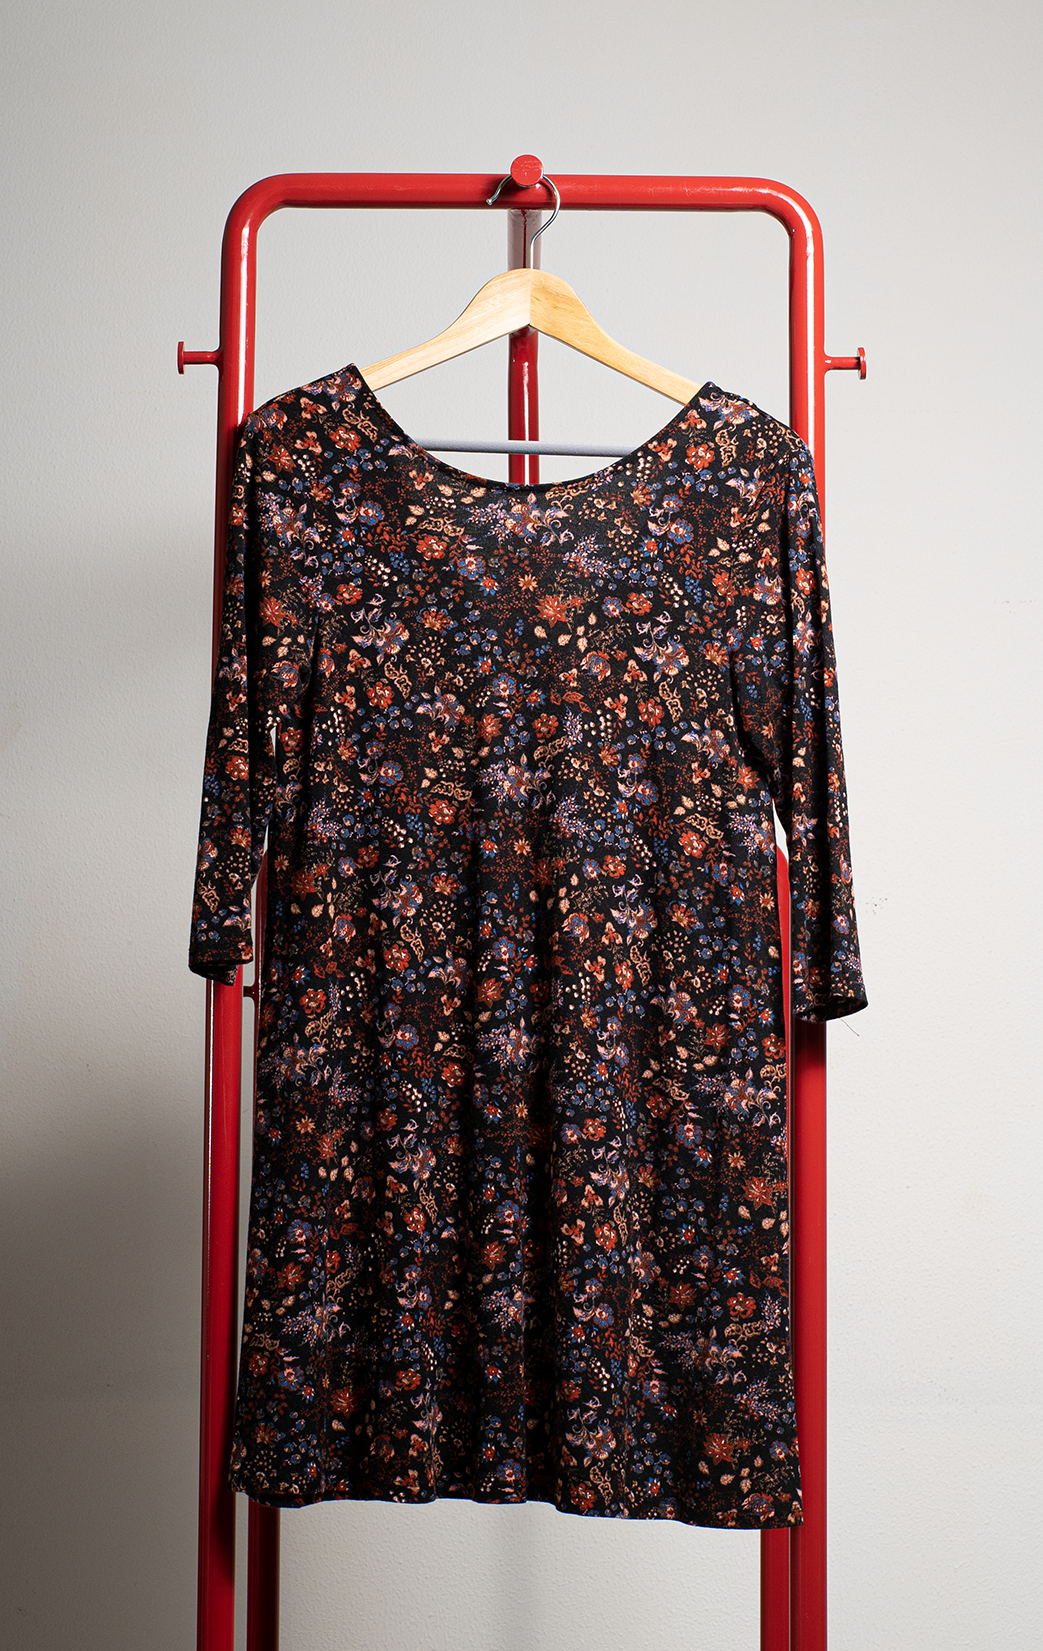 PULL & BEAR DRESS - Black with mini florals pattern pink, red & blue - Small